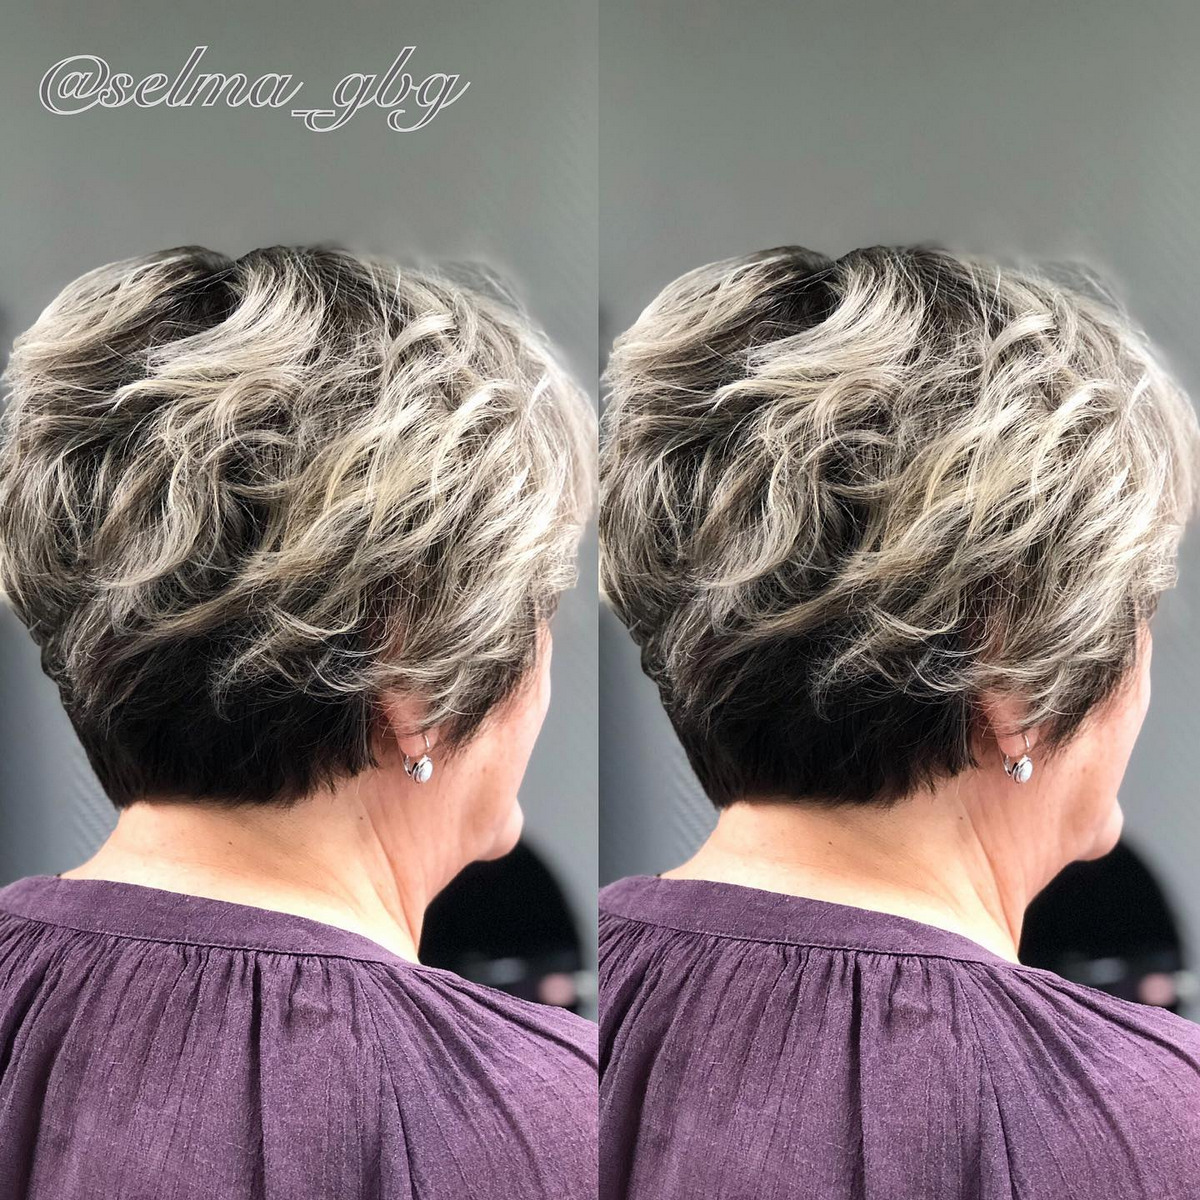 Short Feathered Cut